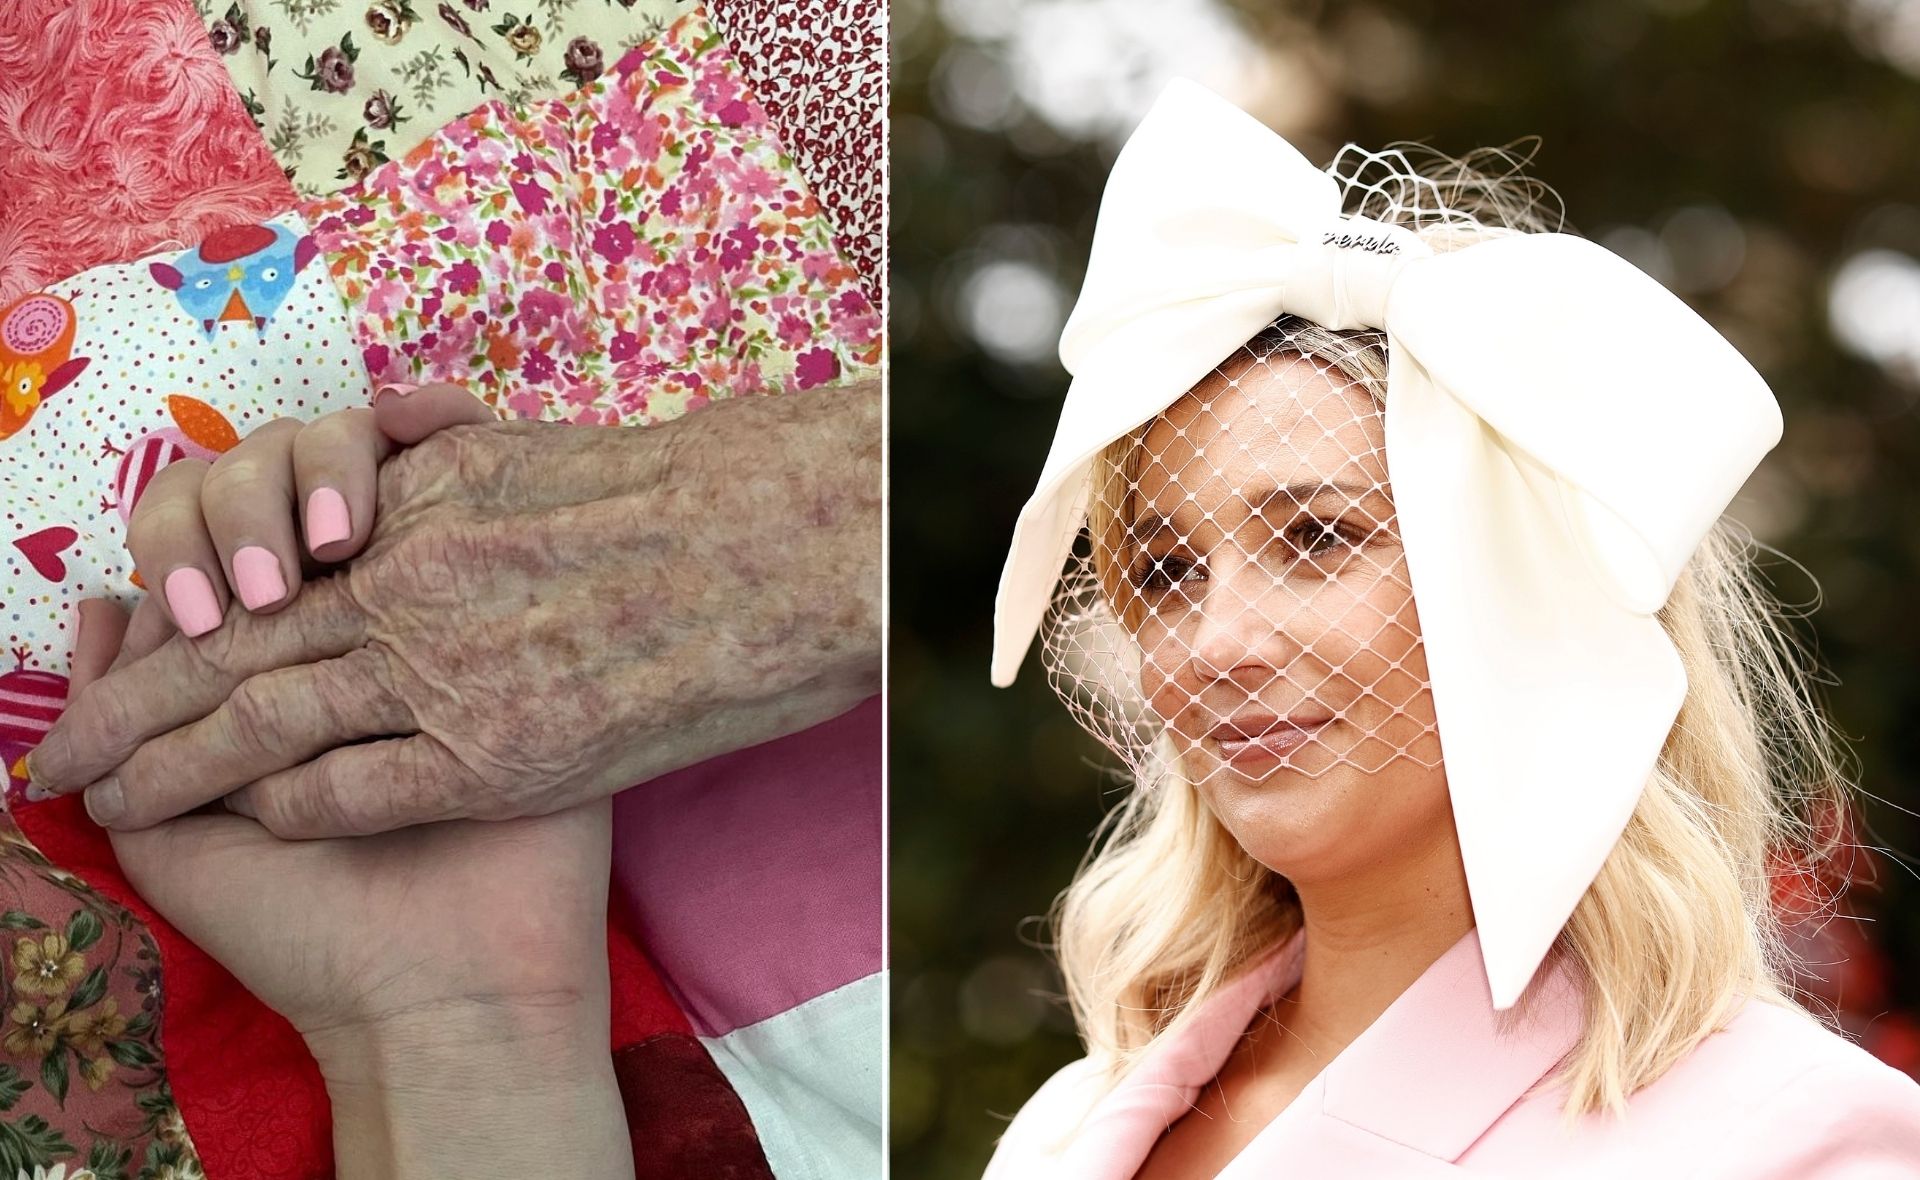 Jasmine Stefanovic pays tribute to her late grandmother, who has passed away at 96-years-old